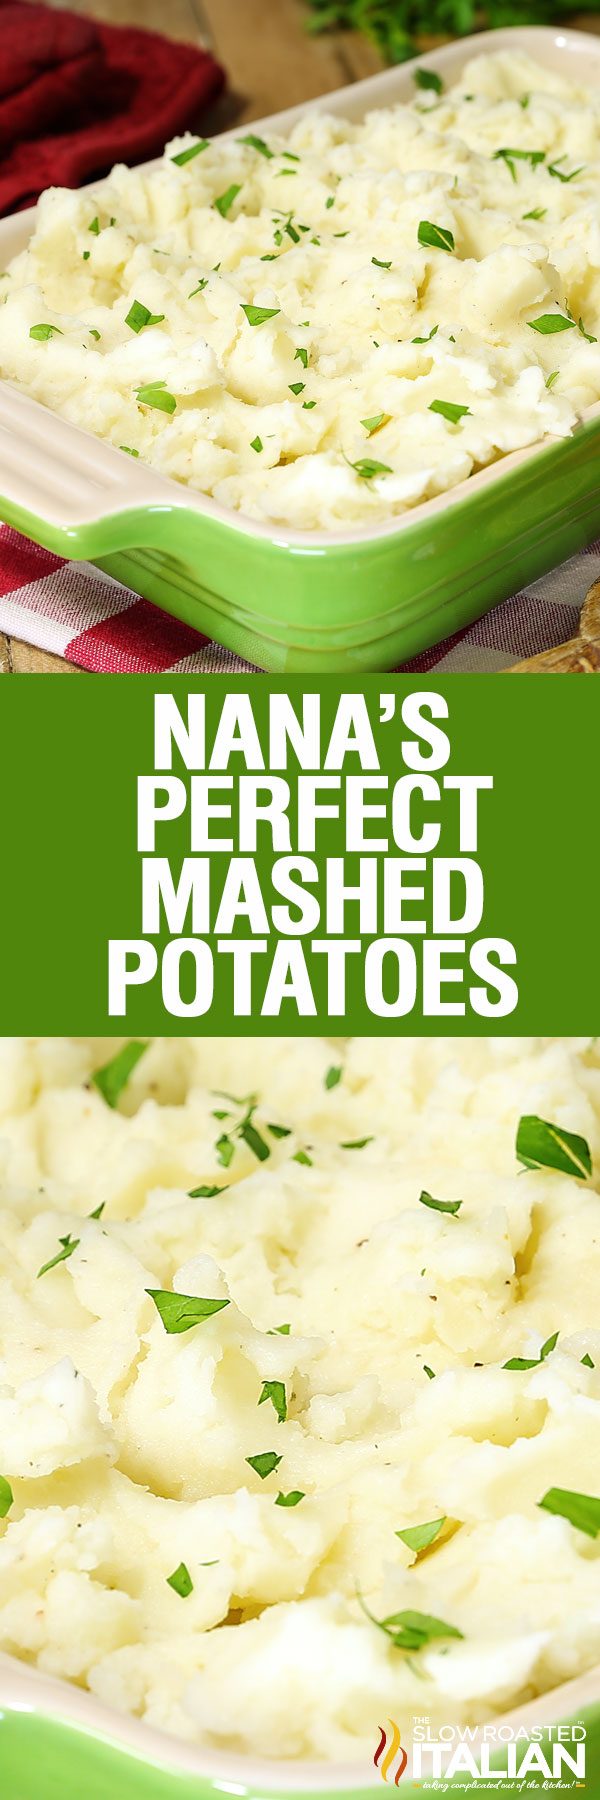 Perfect Everyday Mashed Potatoes are perfectly buttery and creamy with the ideal texture and flavor with a special ingredient added to give a little something extra. The perfect side dish that is easy enough to make any night of the week and delicious enough for a special occasion. With make-ahead instructions, these are the ultimate weekday mashed potatoes!